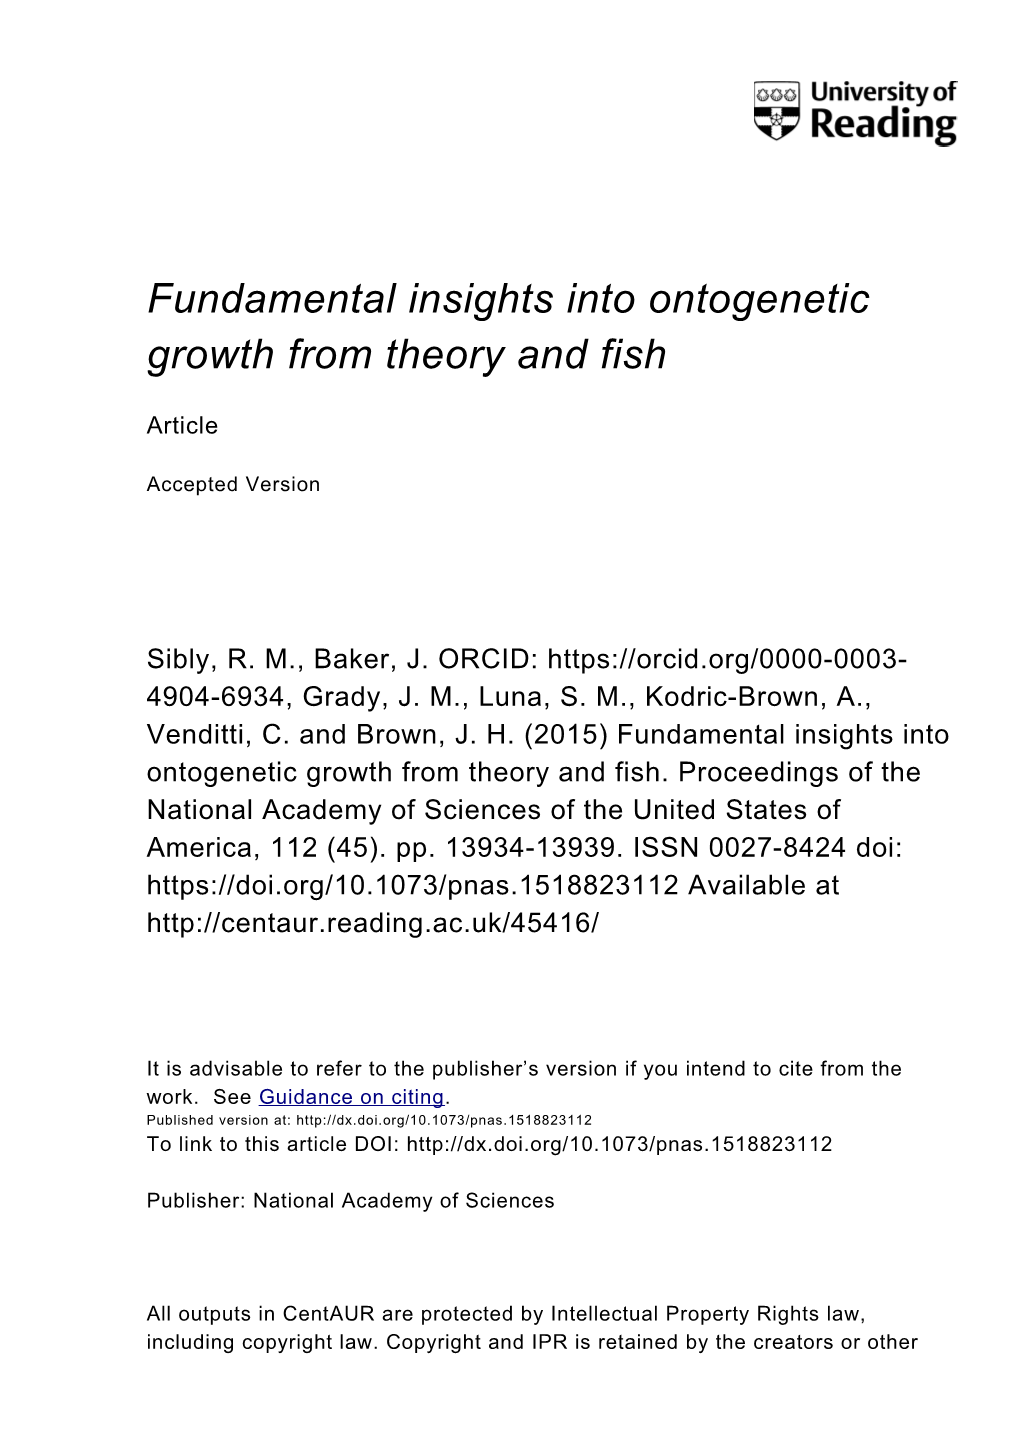 Fundamental Insights Into Ontogenetic Growth from Theory and Fish